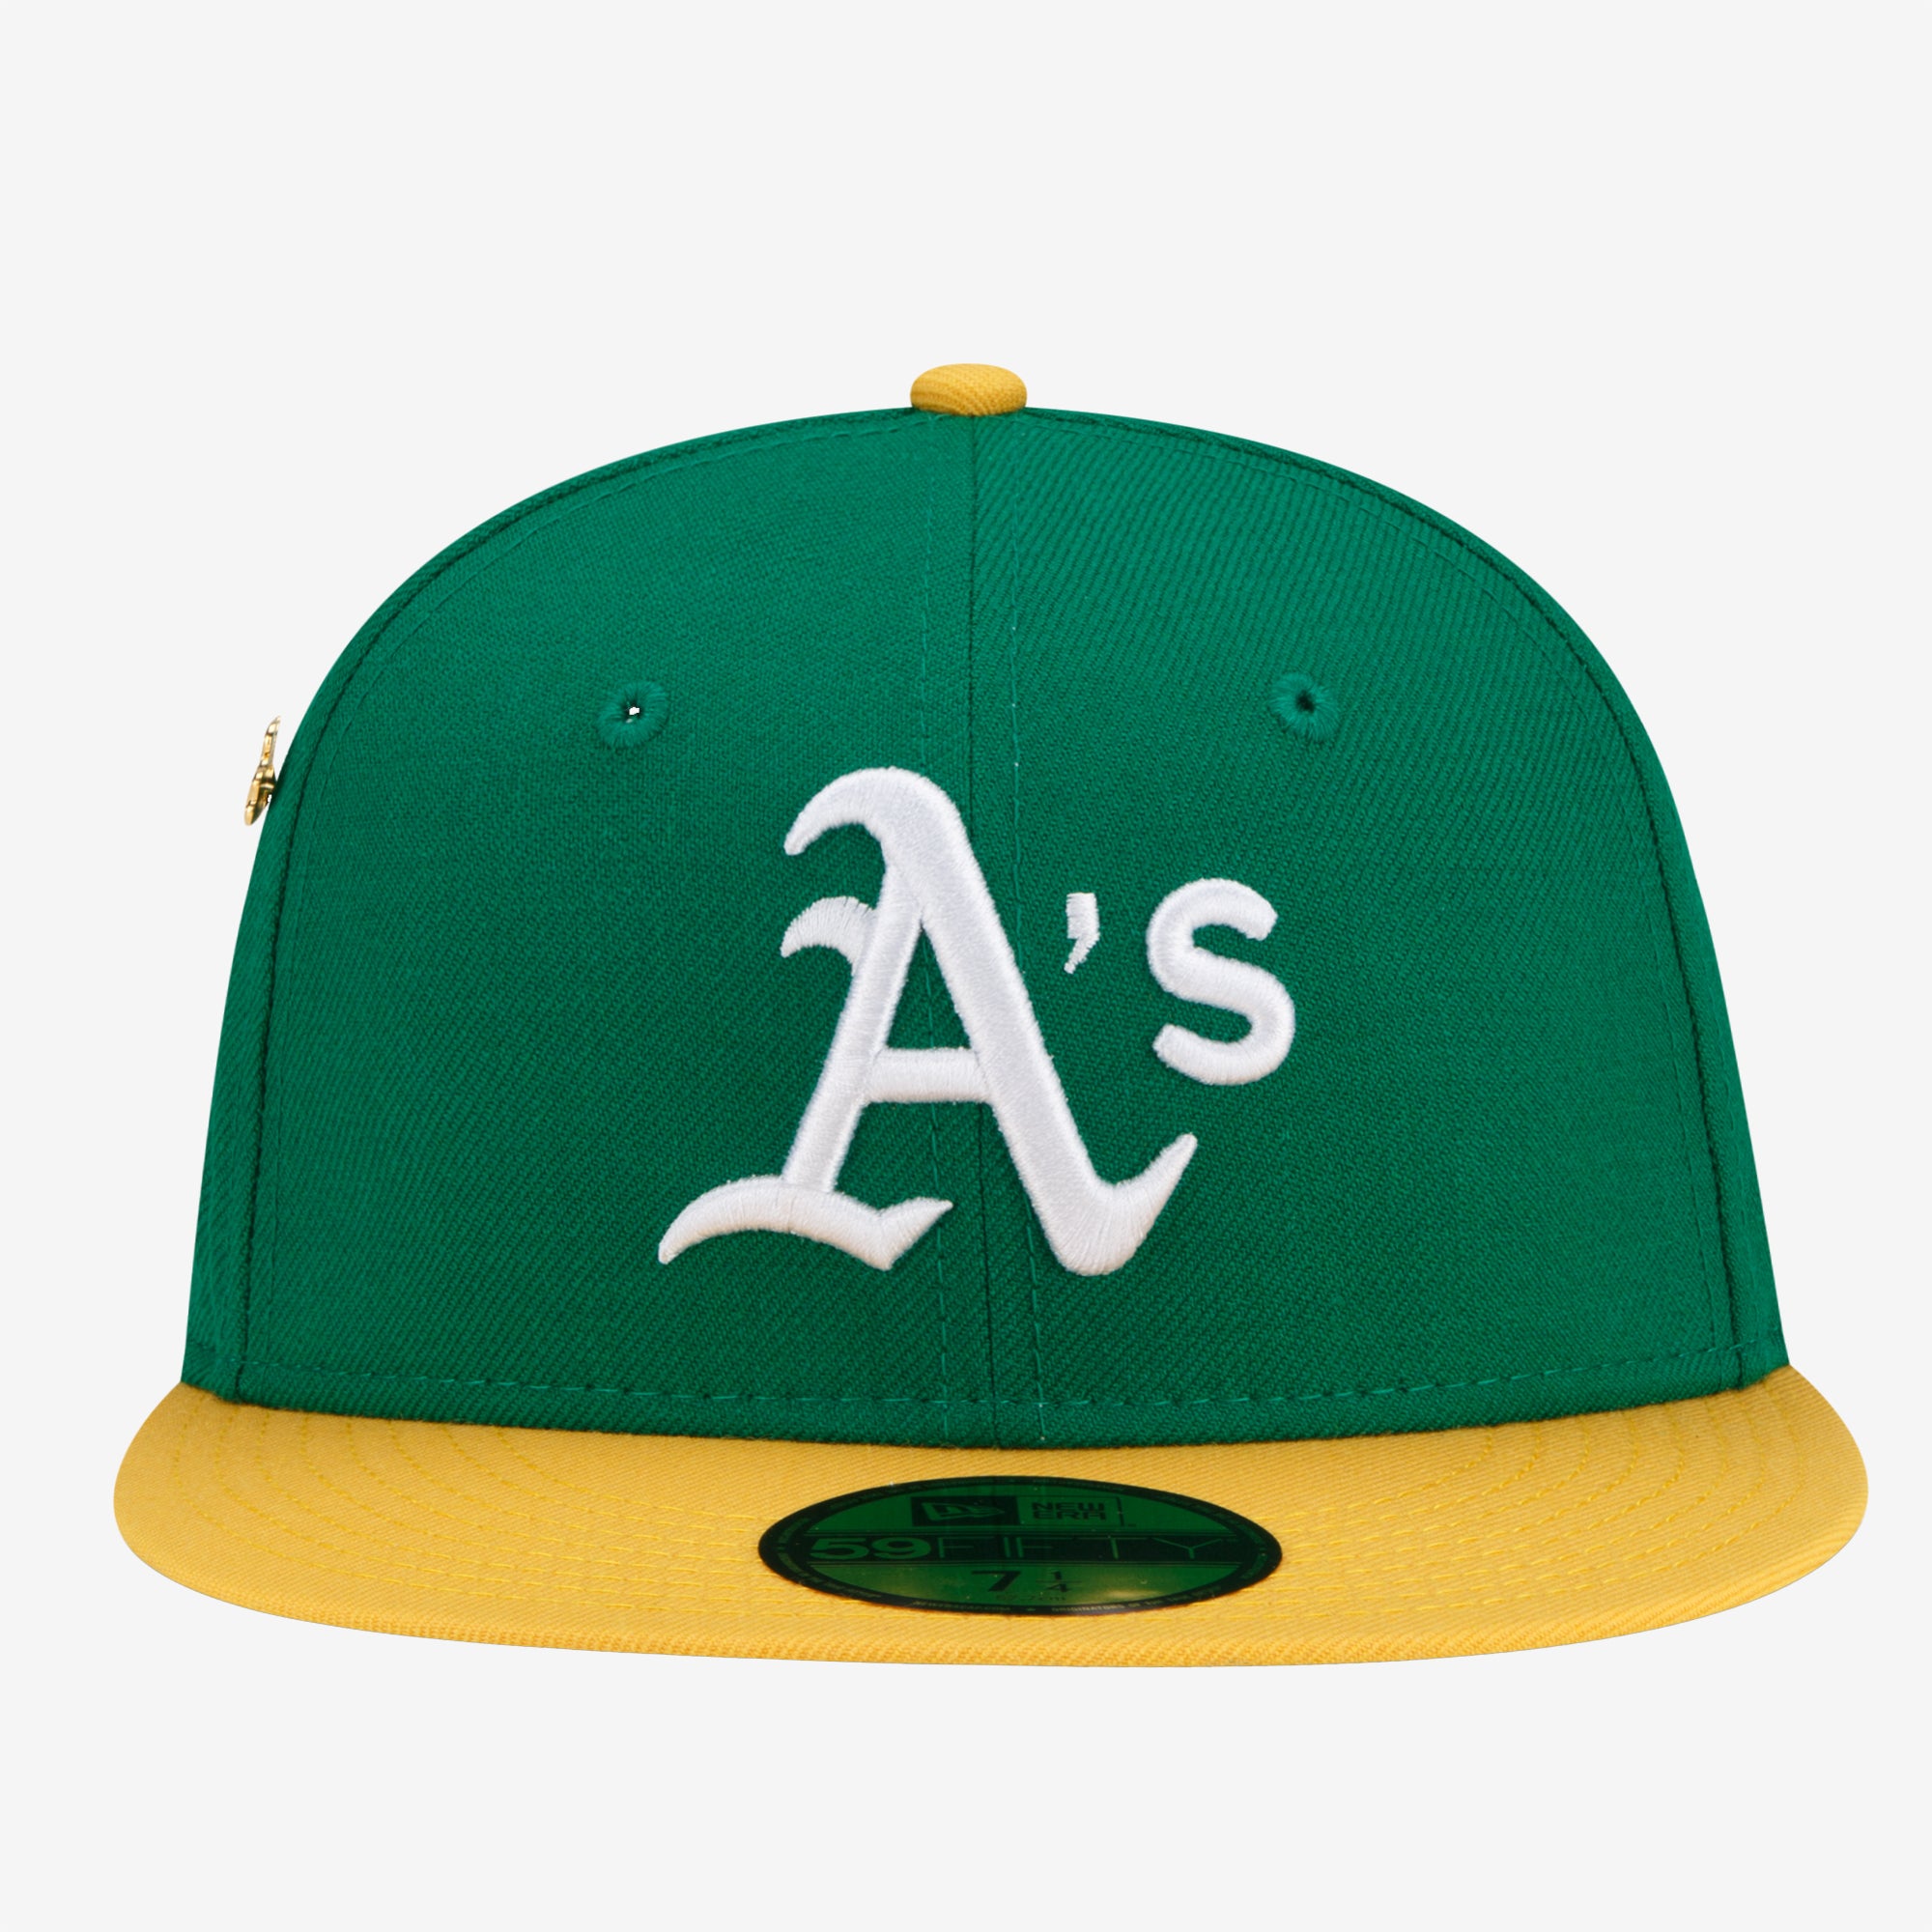 Green cap with embroidered Oakland As on crown, yellow bill with brand sticker.